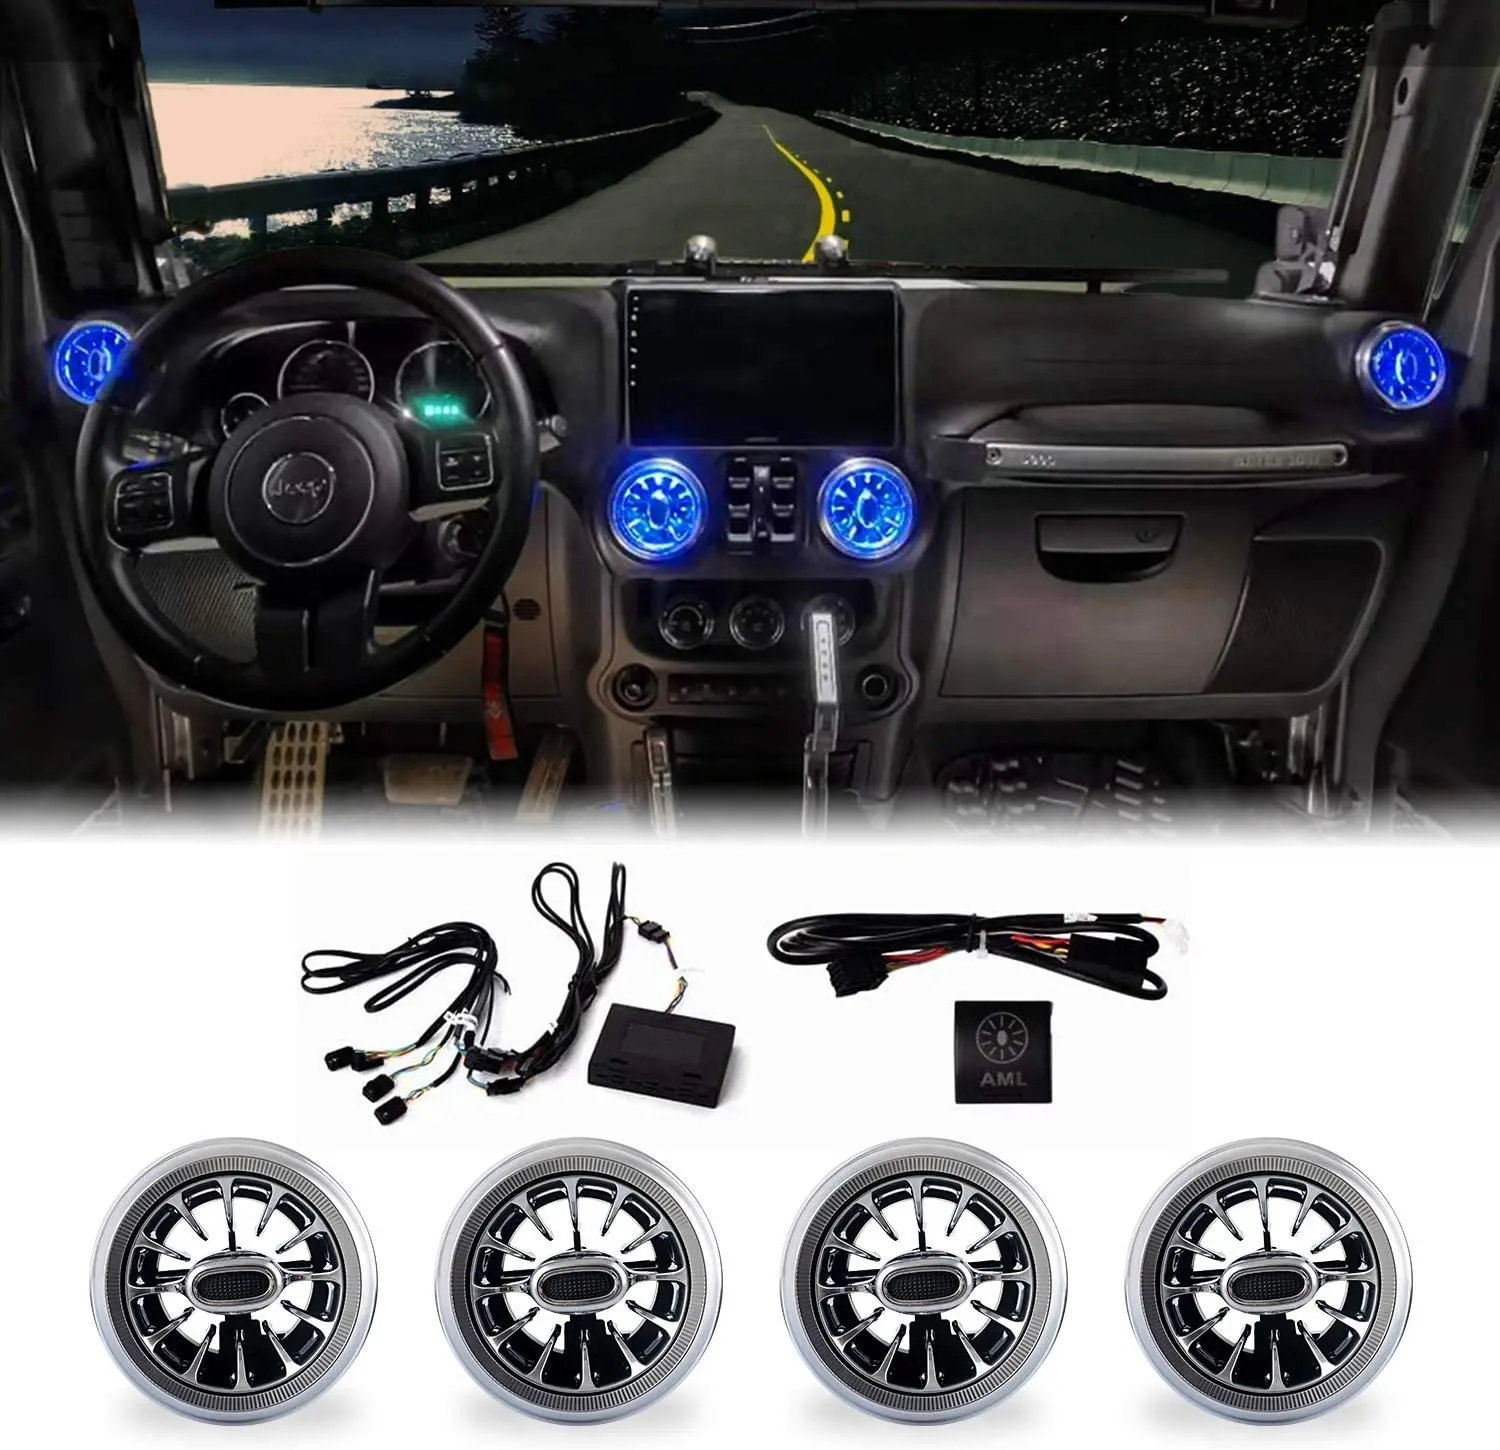 4Pcs Atmosphere Lamps 32 Colors Ambient Lights Turbine Outlets Lamp Air Conditioner Covers for 2011-2017 Jeep Wrangler JK JKU